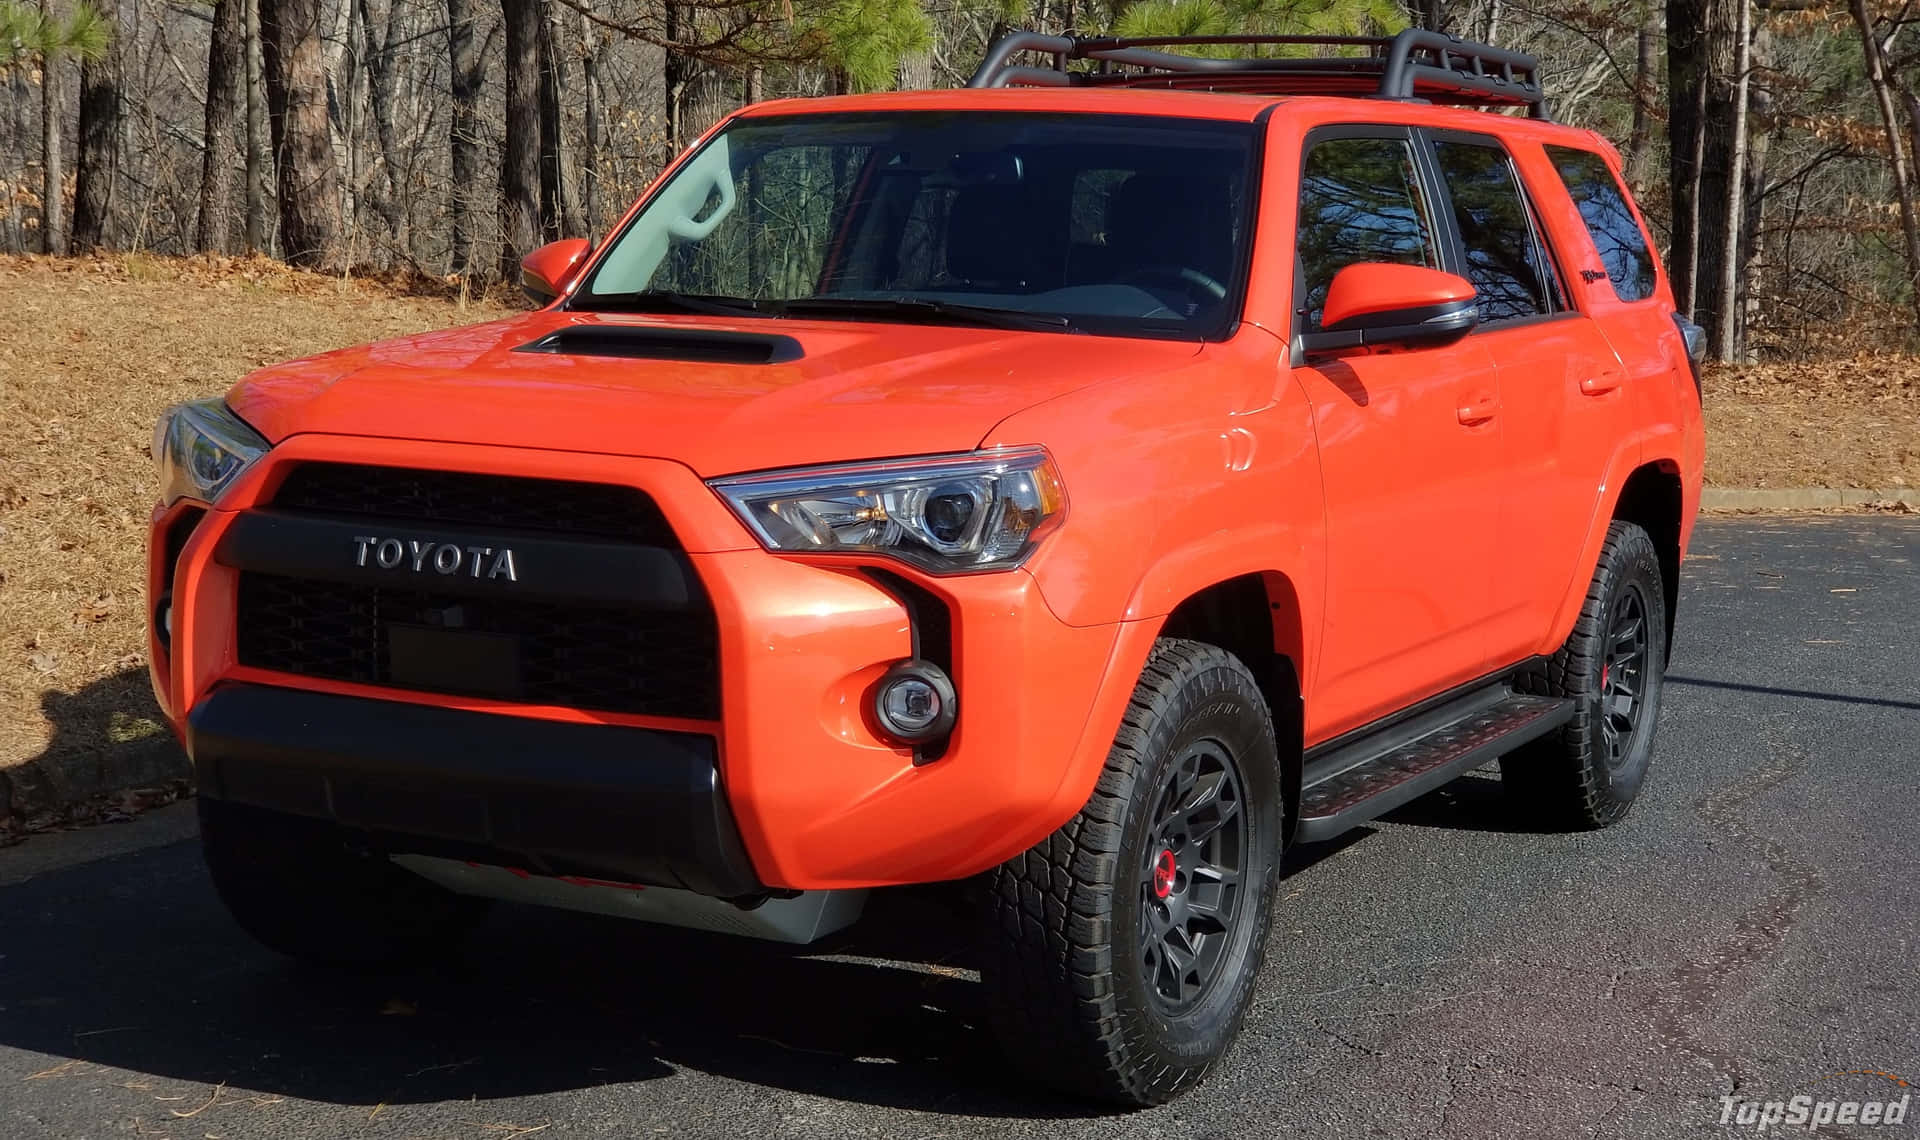 The Orange Toyota 4runner Is Parked On The Road